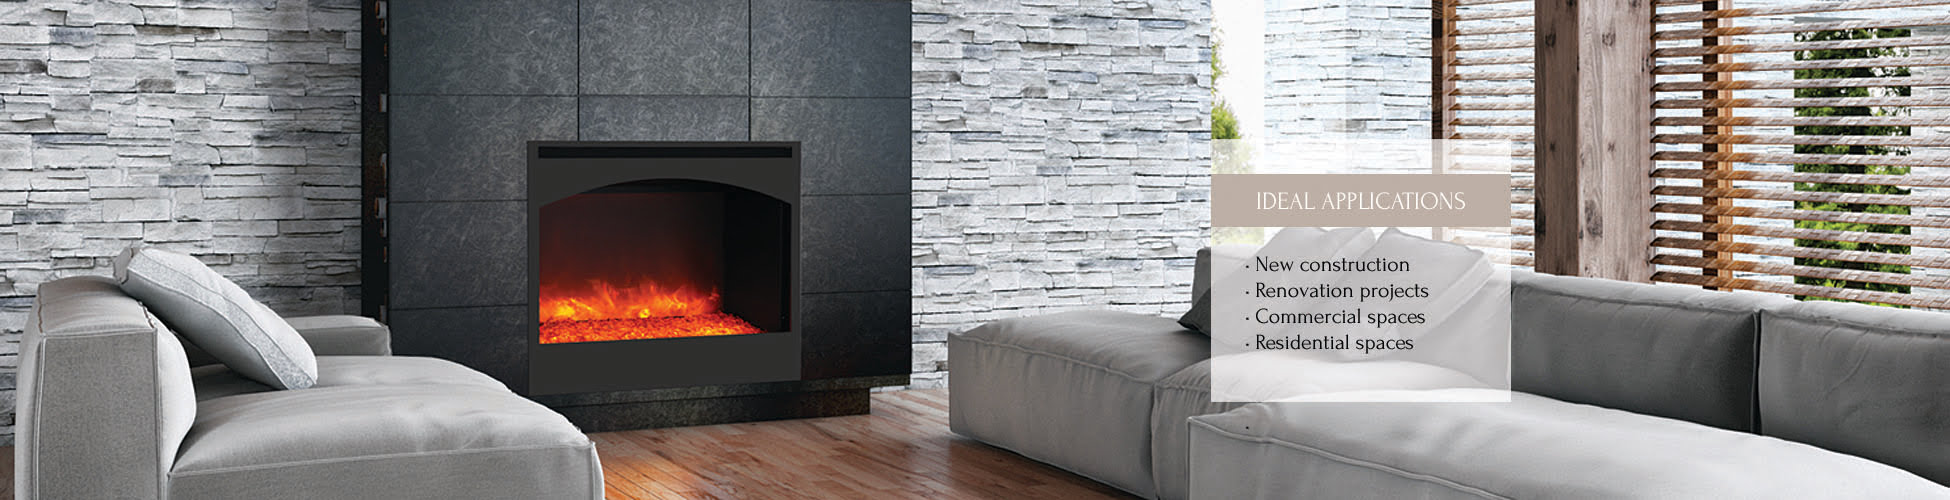 ZECL-31-3228-STL-ARCH electric fireplace